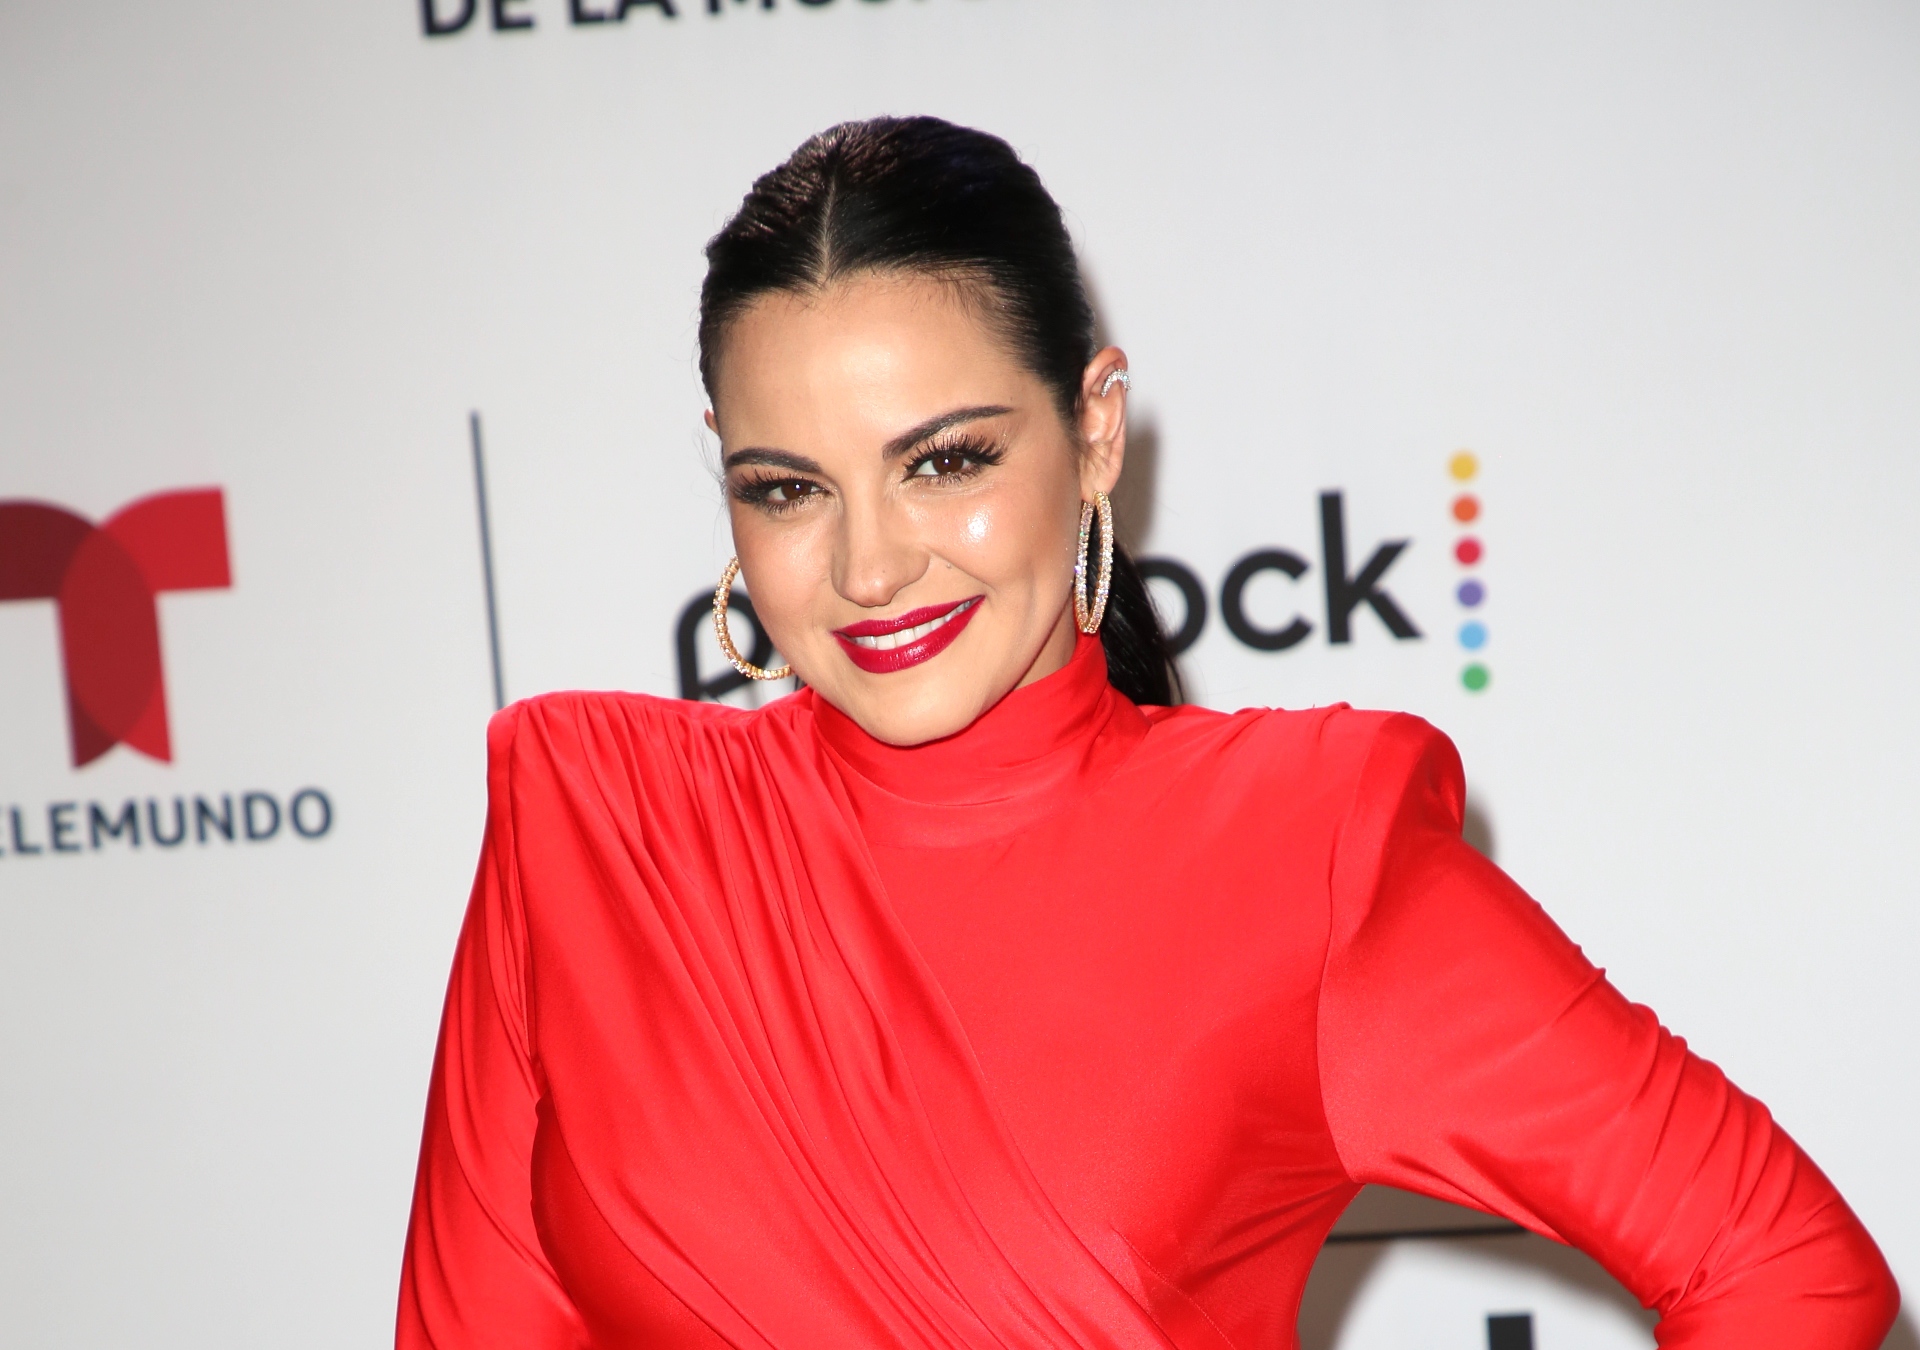 Maite Perroni brings out her sensual side and poses in a swimsuit next ...